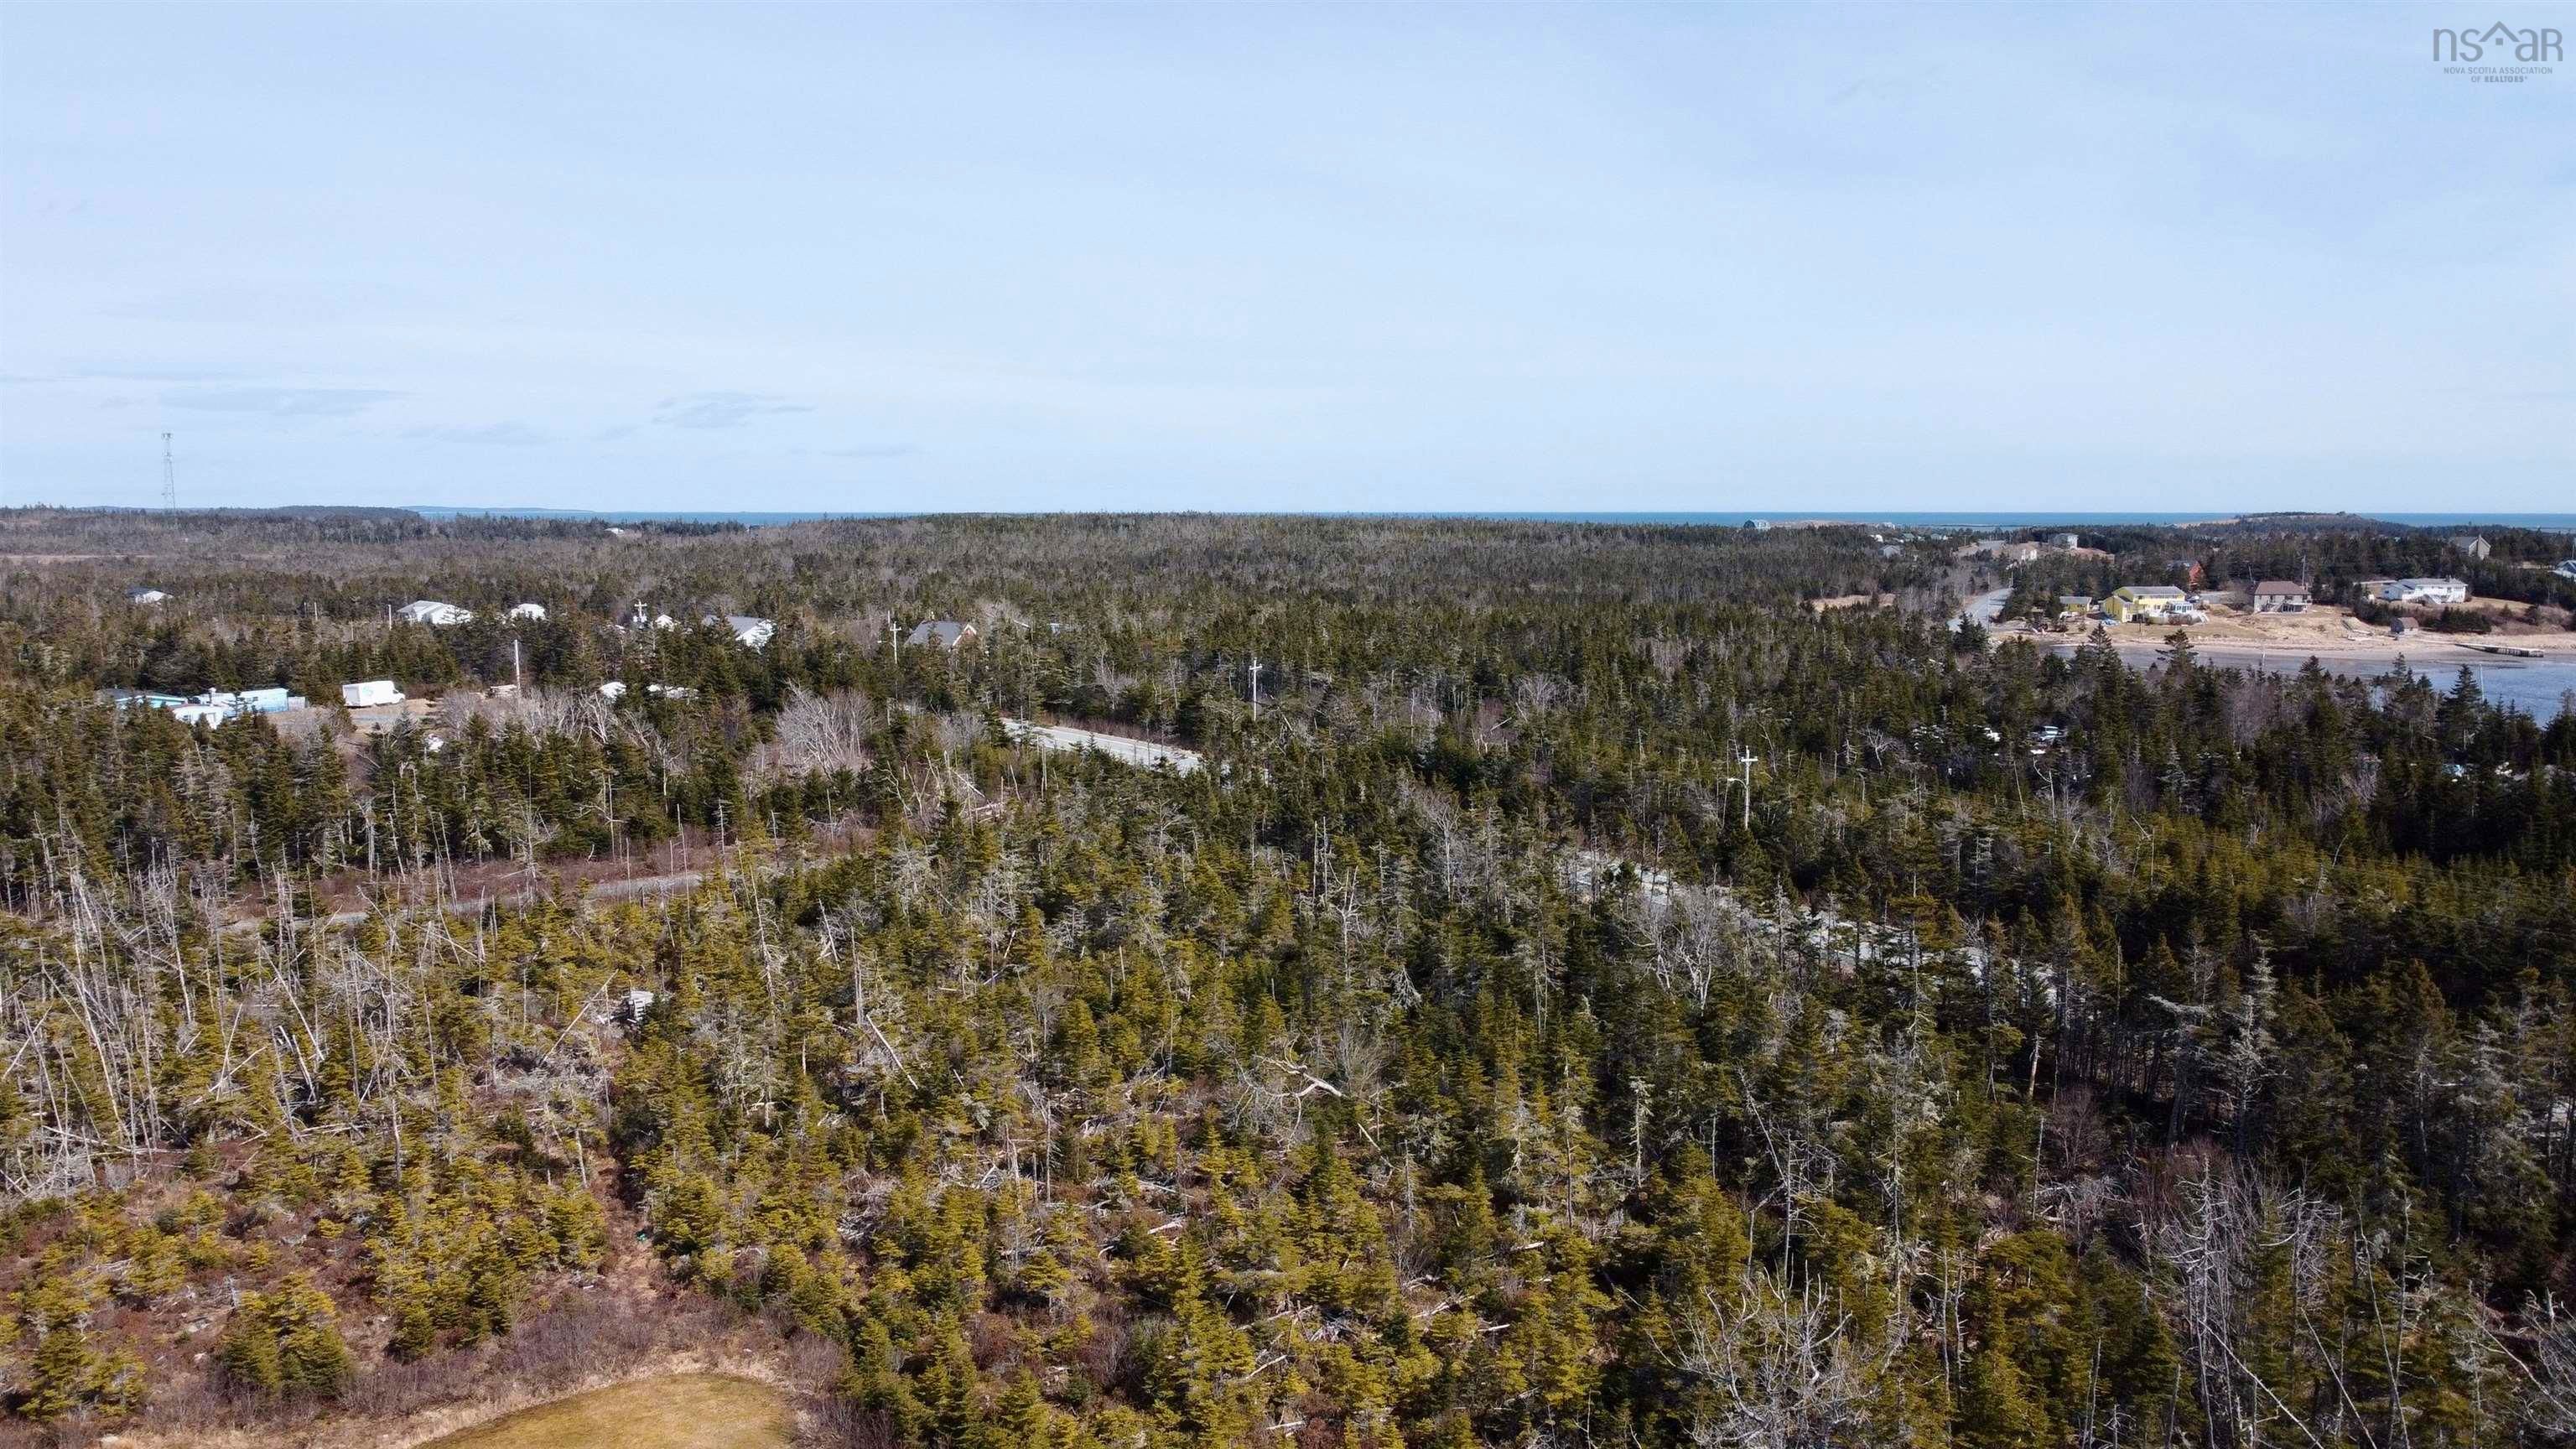 Main Photo: 1 Emerald Drive in Three Fathom Harbour: 31-Lawrencetown, Lake Echo, Port Vacant Land for sale (Halifax-Dartmouth)  : MLS®# 202207849